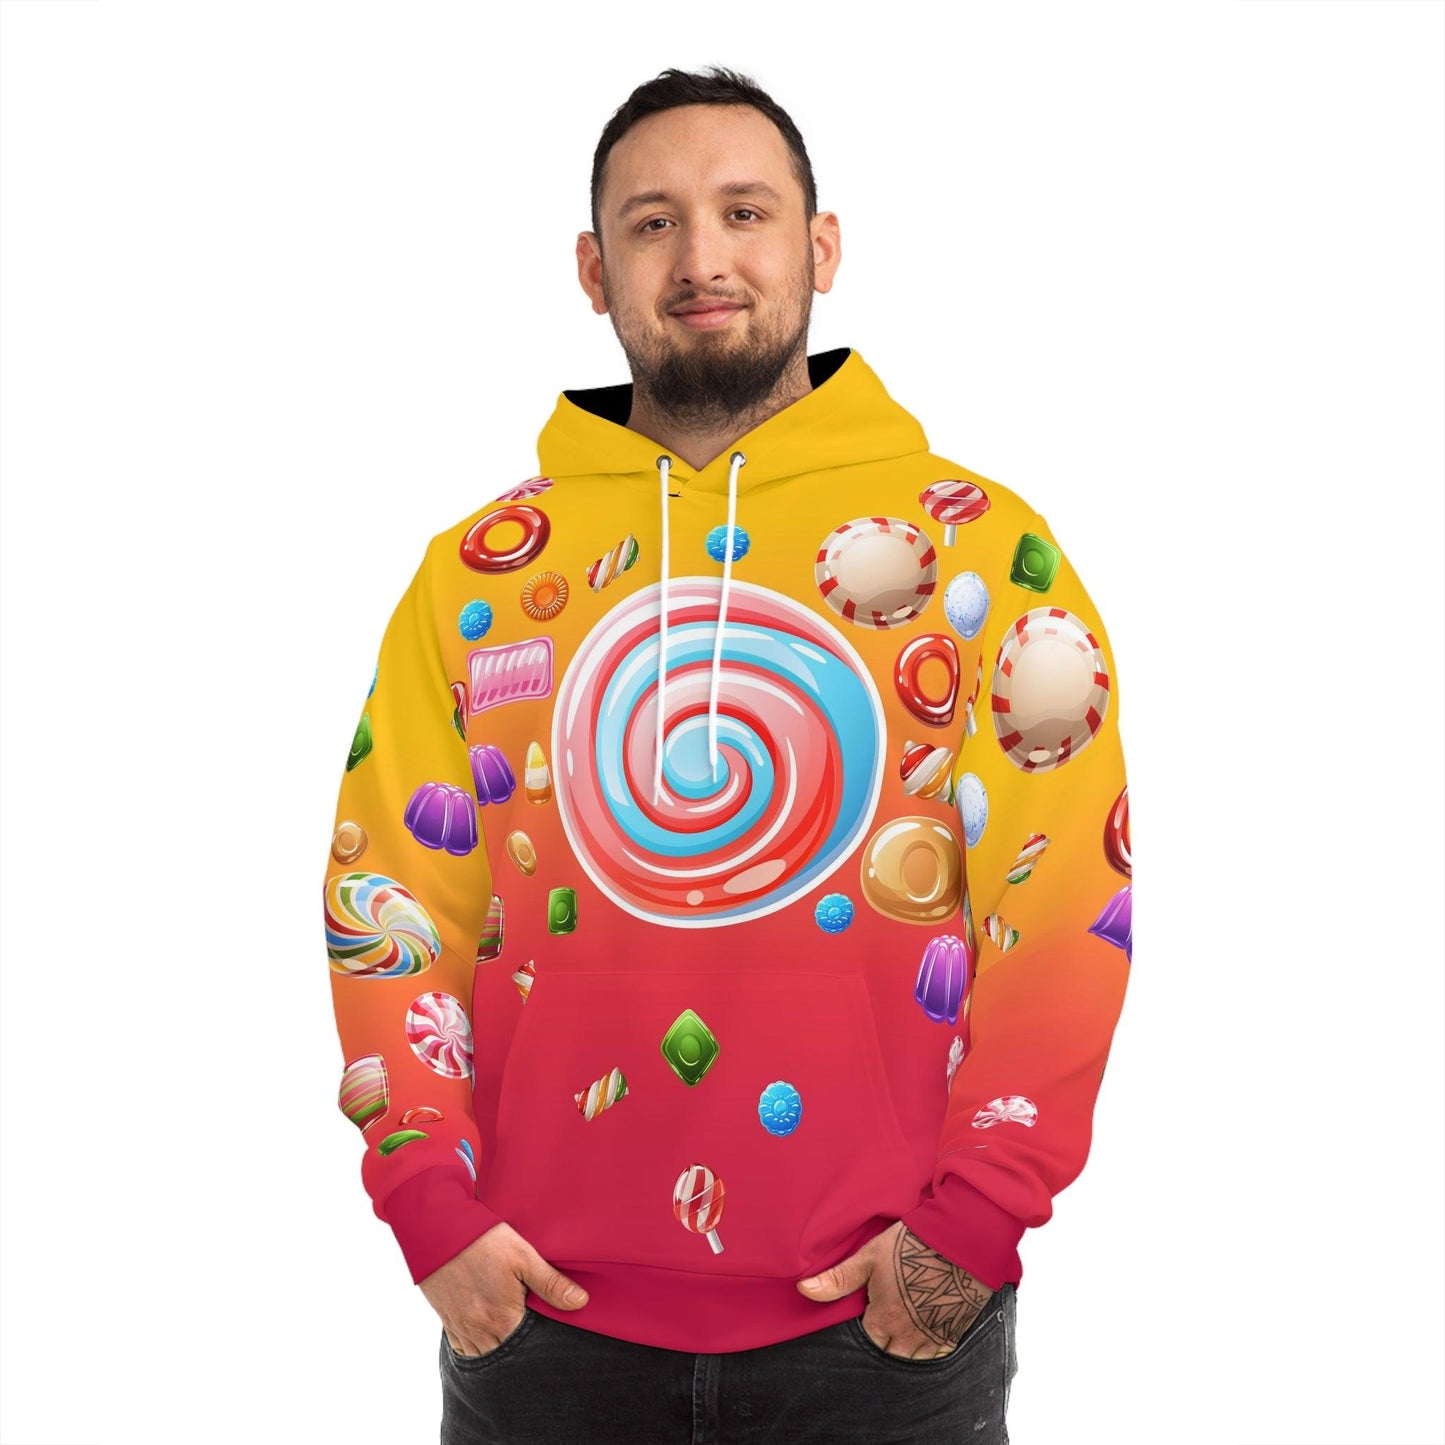 Crush Your Gaming Style with Our Gamer Hoodie! - Ultimate Game Wear